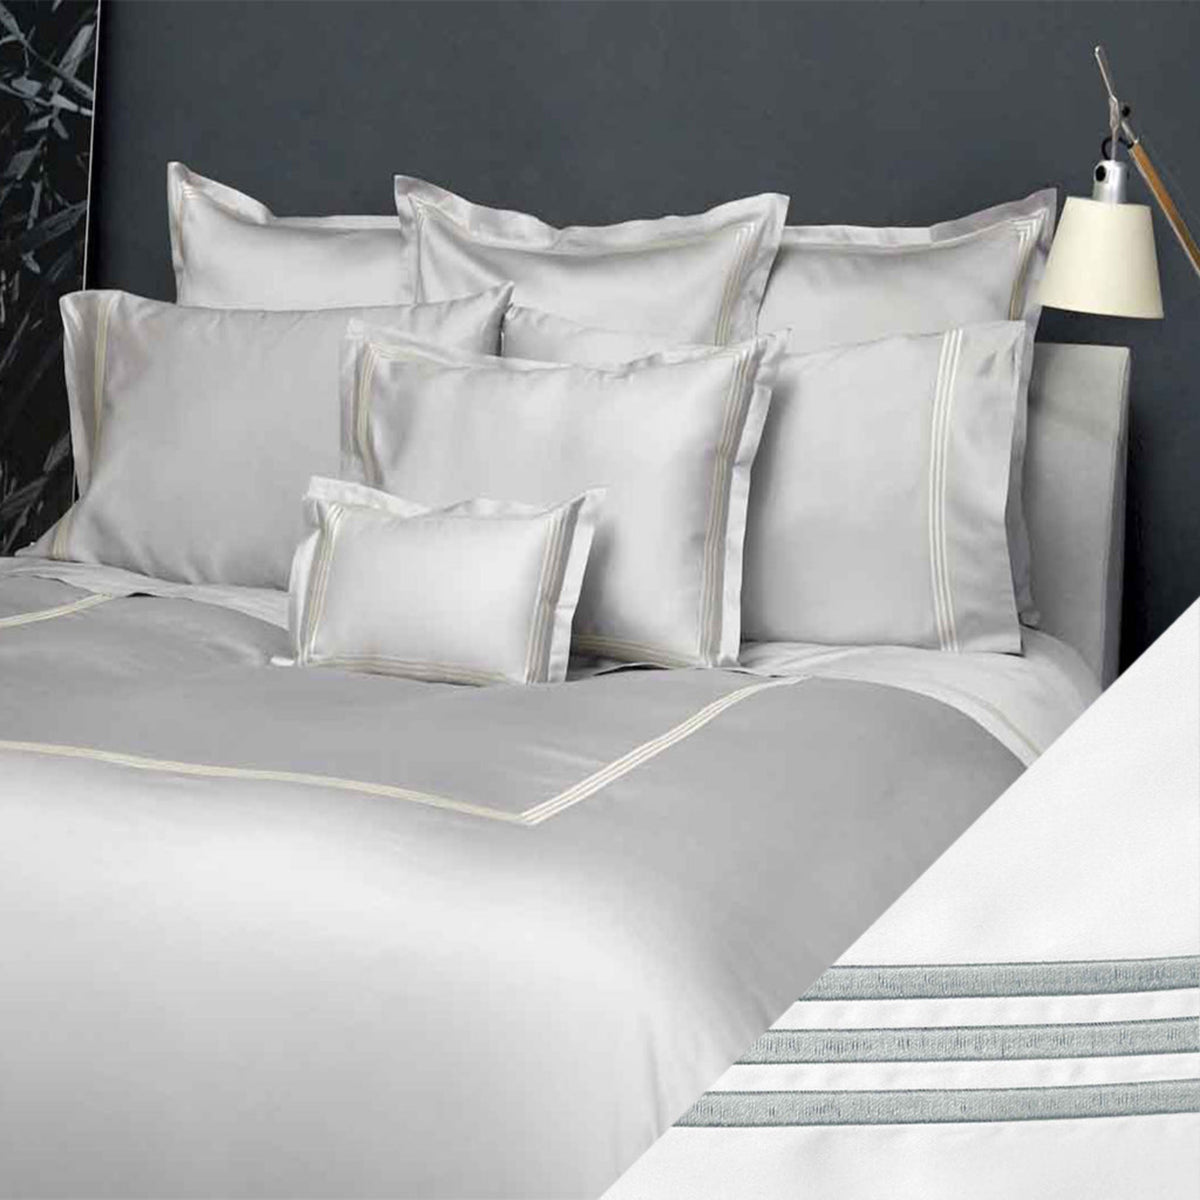 Full Bed Dressed in Signoria Platinum Sateen Bedding with White/Wilton Blue Swatch